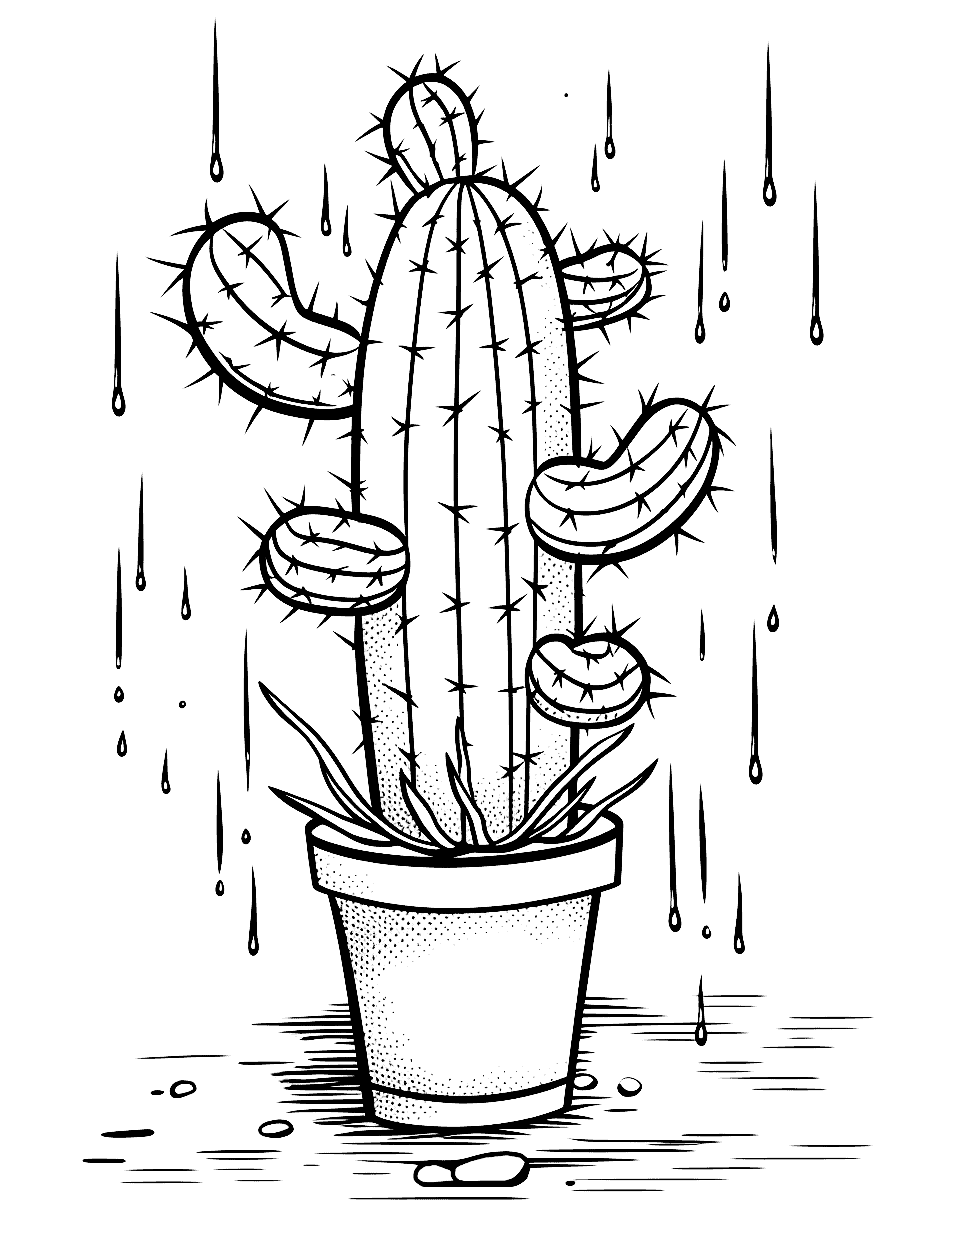 Cactus in a Rain Shower Coloring Page - A scene of a cactus in a top enjoying a rare rain shower with raindrops falling around it.